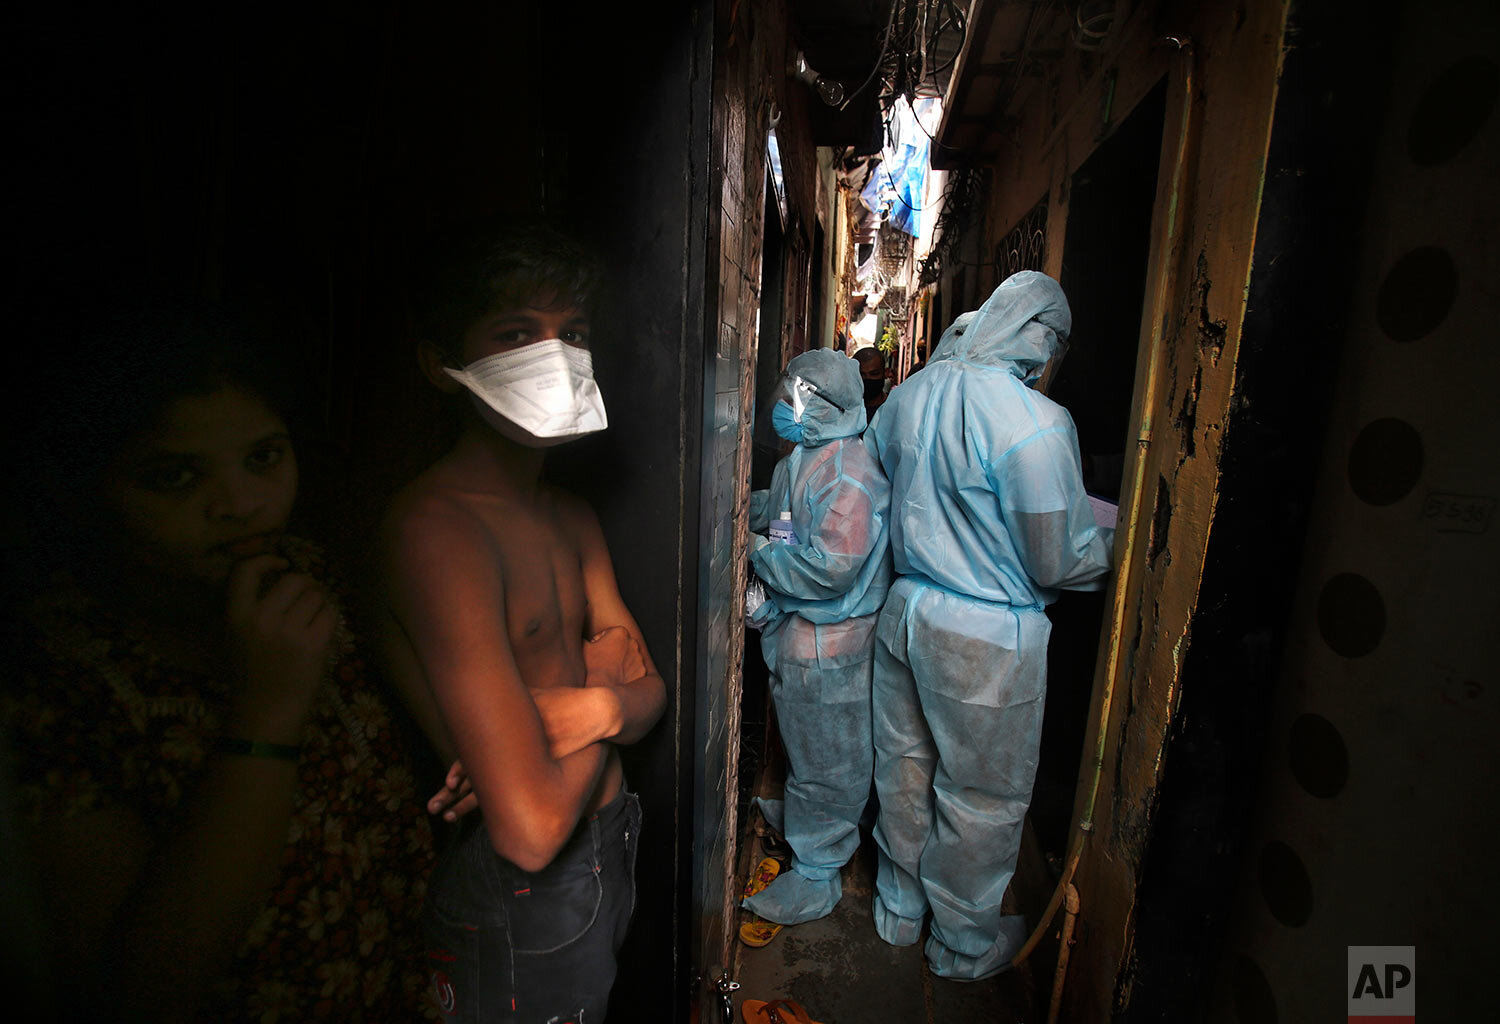  Indian health workers wearing personal protective equipment perform door to door check ups at a slum in Mumbai, India, Wednesday, June 17, 2020. (AP Photo/Rafiq Maqbool) 